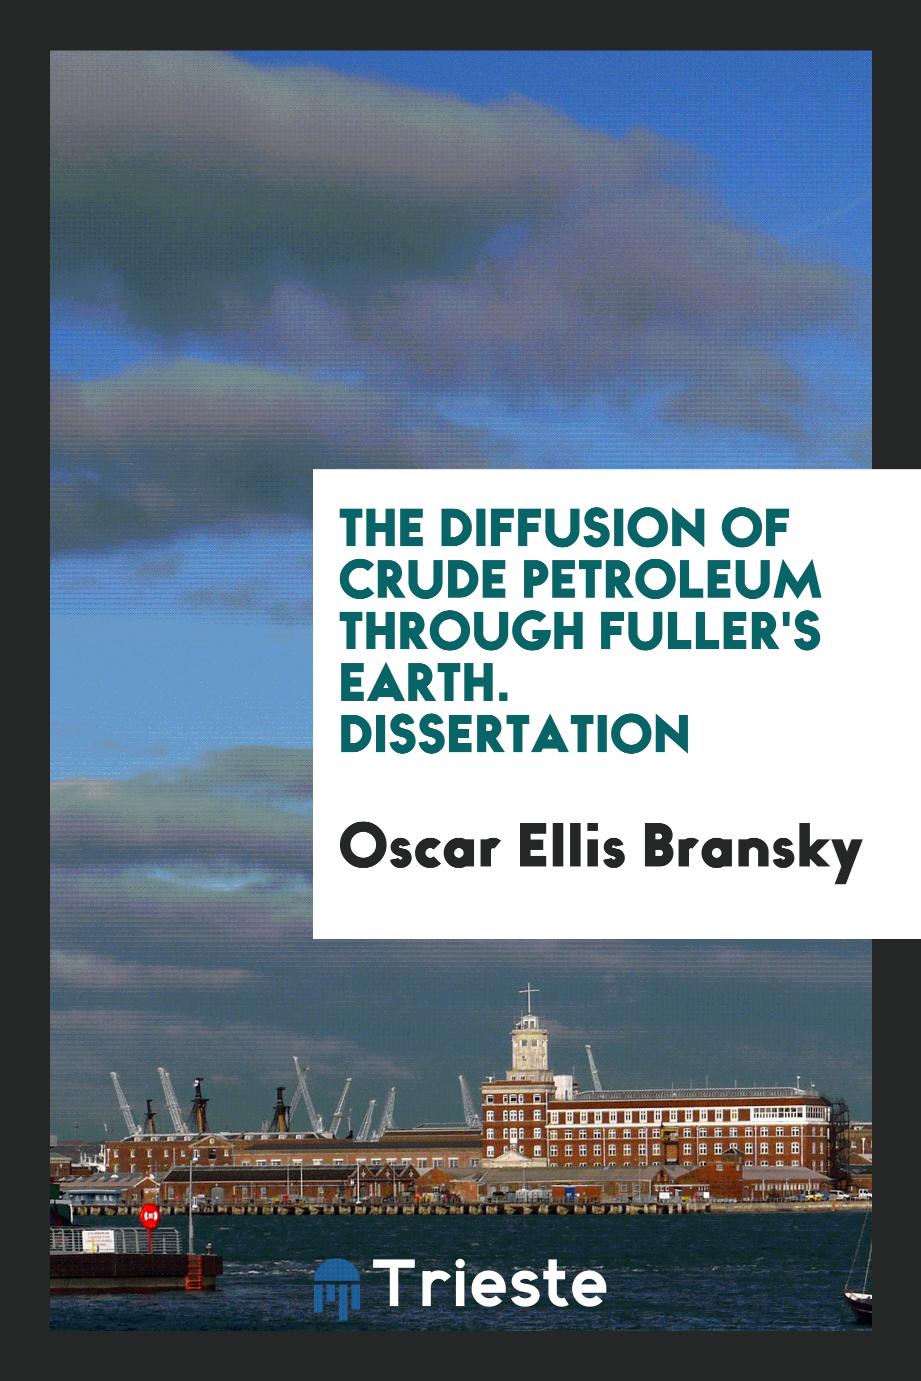 The Diffusion of Crude Petroleum Through Fuller's Earth. Dissertation